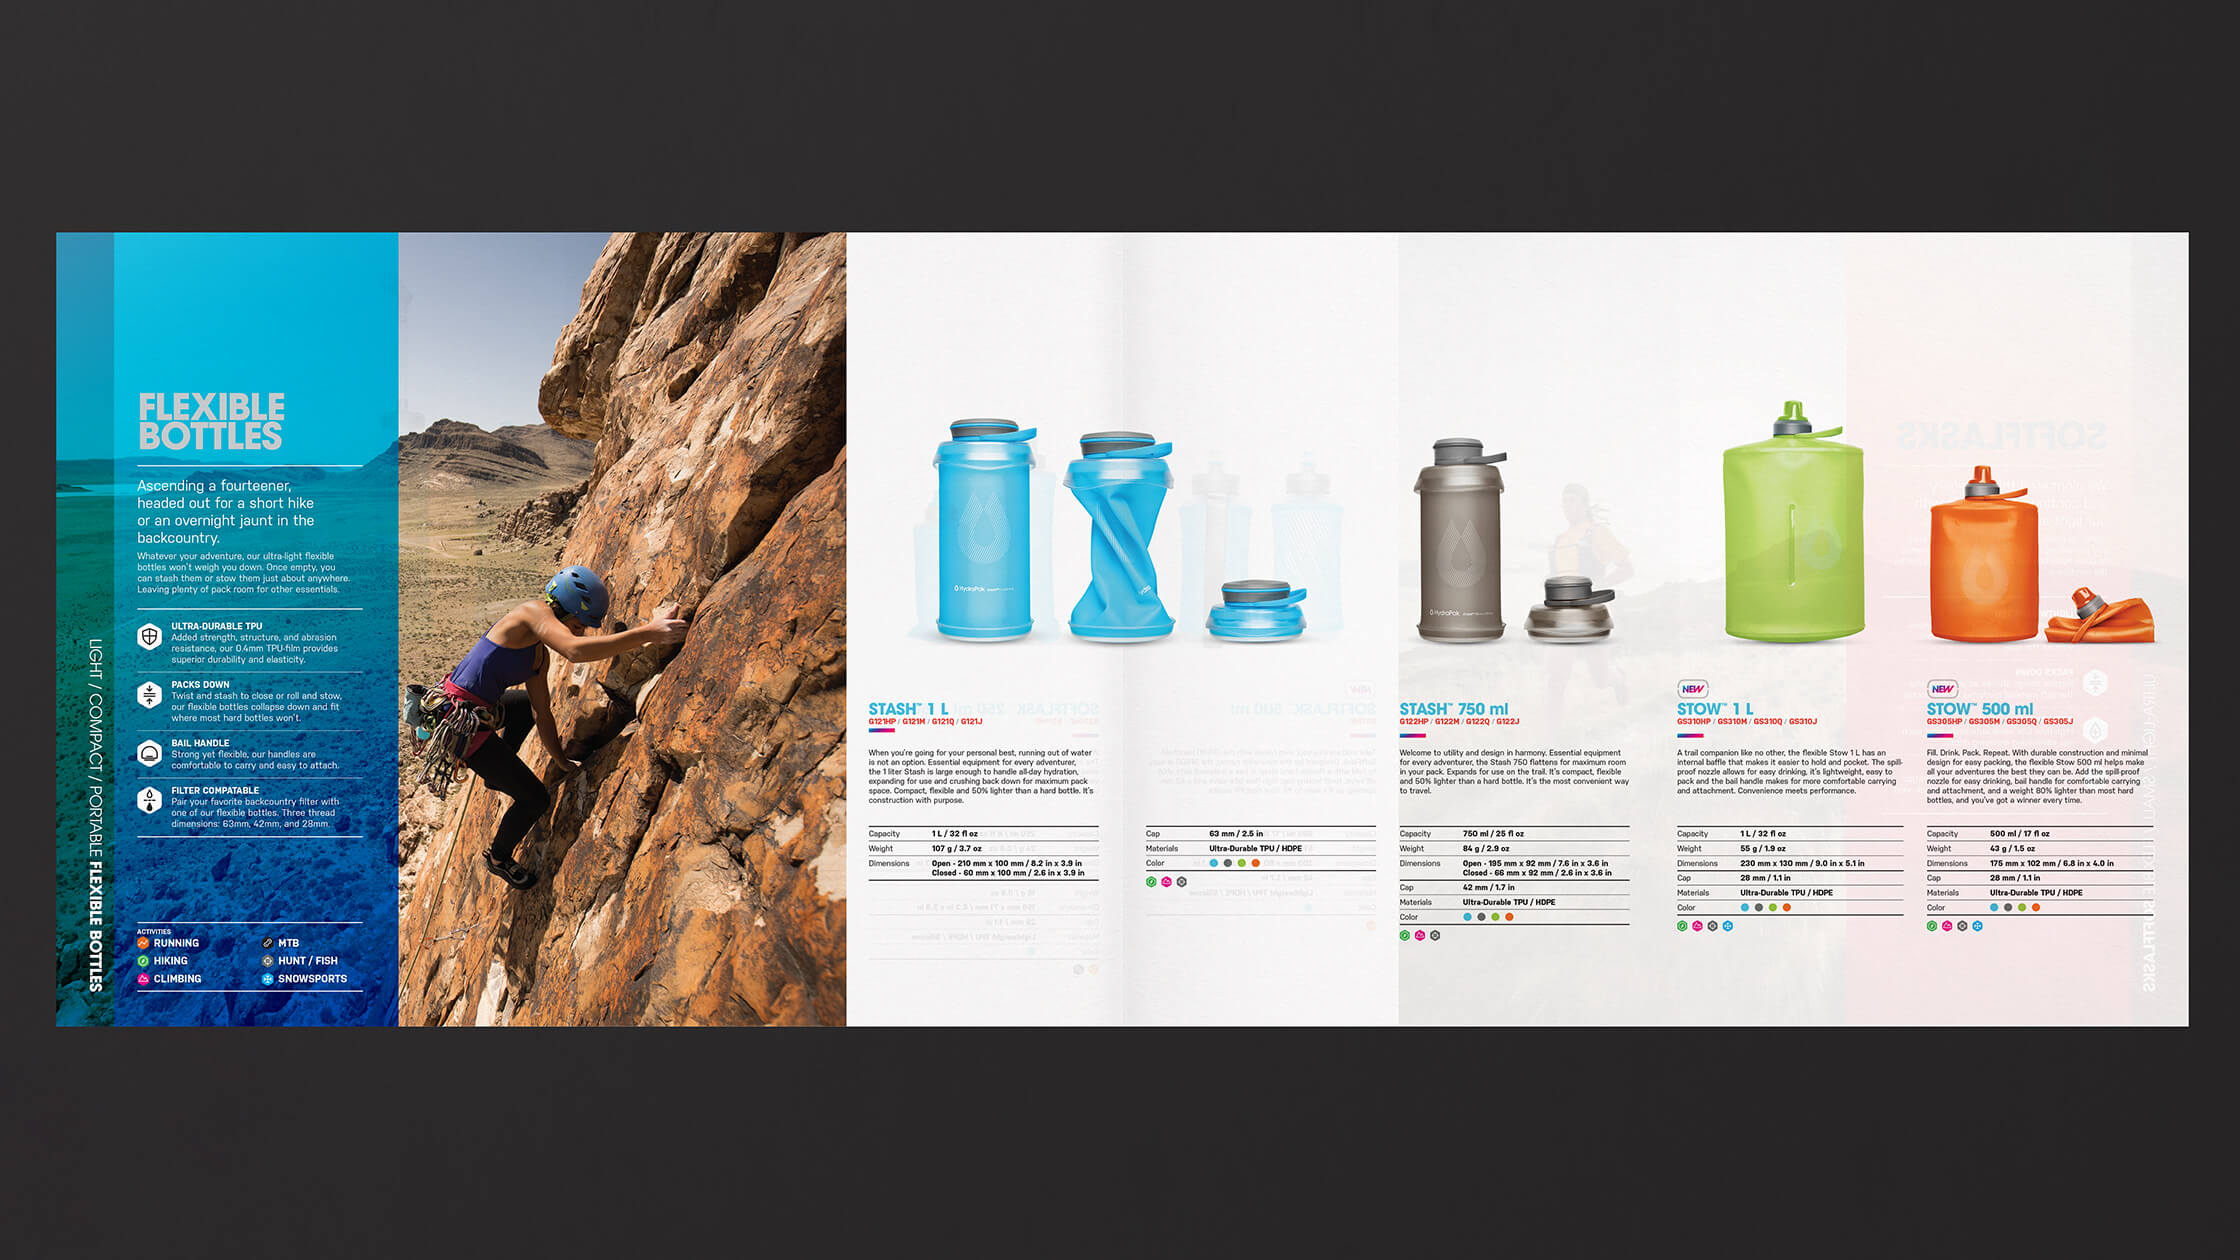 HydraPak product catalog spread showing their flexible bottle range, product descriptions and specs